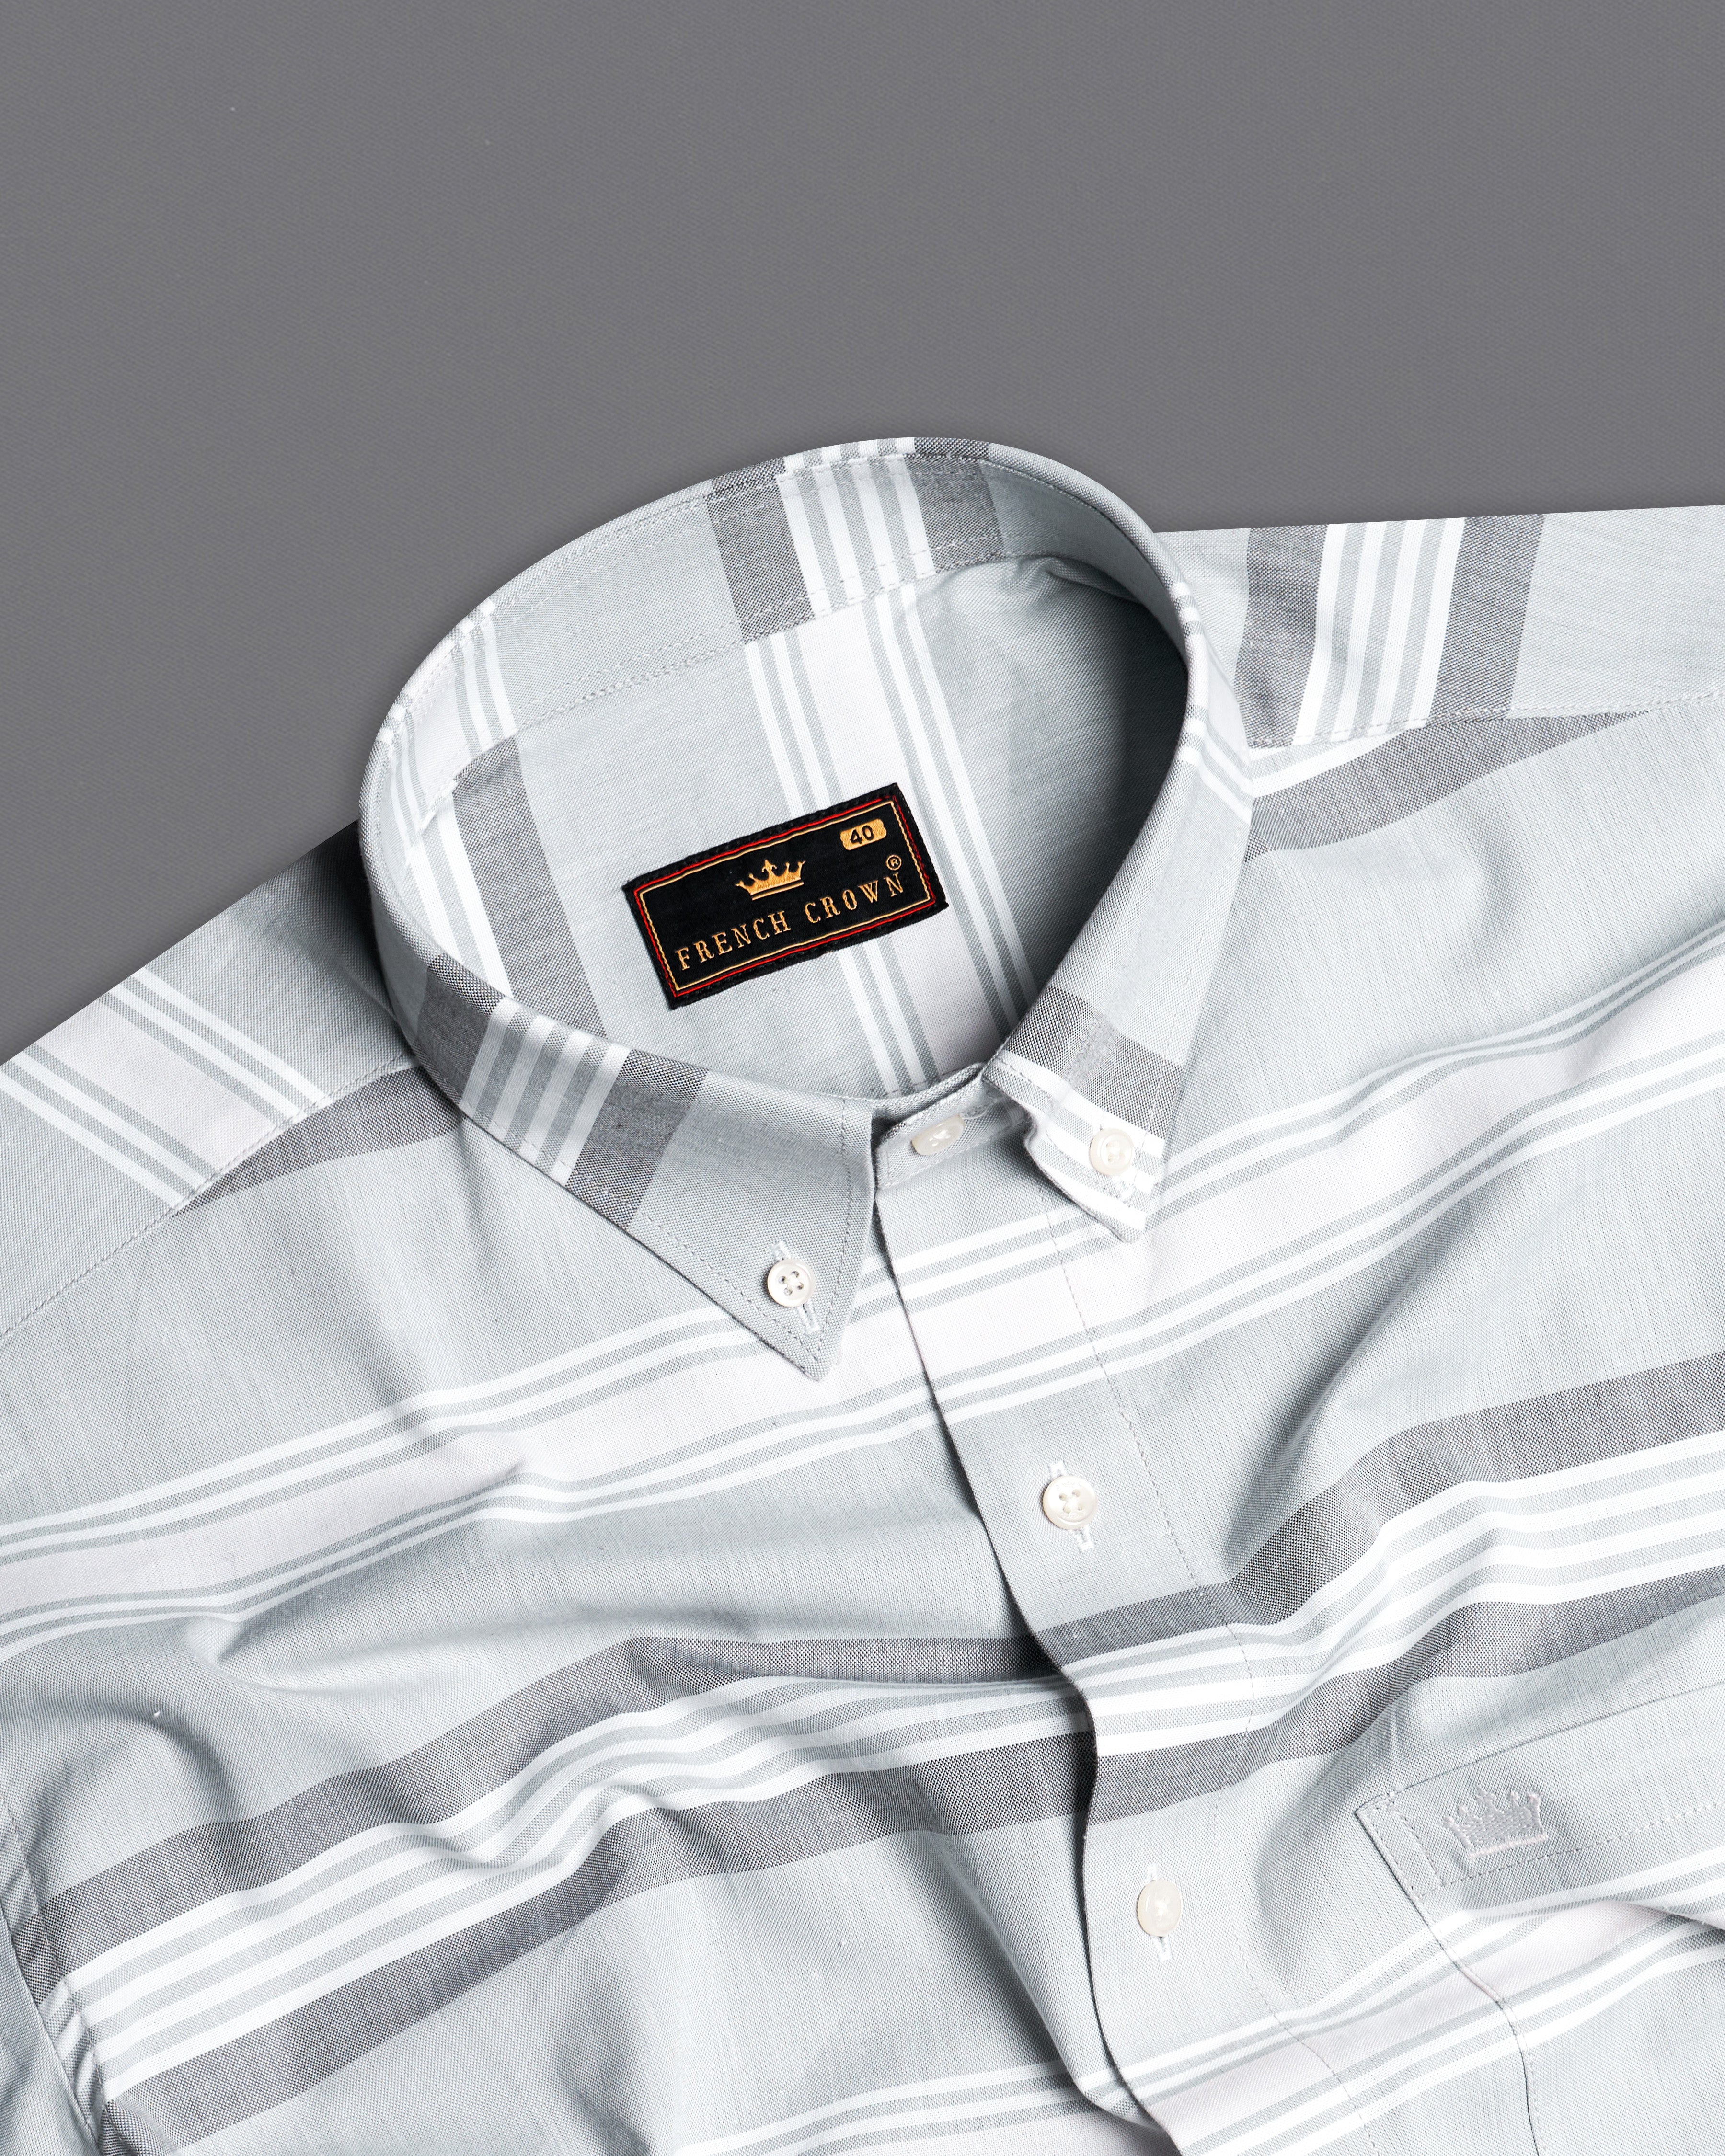 Geyser Gray and White Striped Royal Oxford Shirt 9974-BD-38, 9974-BD-H-38, 9974-BD-39, 9974-BD-H-39, 9974-BD-40, 9974-BD-H-40, 9974-BD-42, 9974-BD-H-42, 9974-BD-44, 9974-BD-H-44, 9974-BD-46, 9974-BD-H-46, 9974-BD-48, 9974-BD-H-48, 9974-BD-50, 9974-BD-H-50, 9974-BD-52, 9974-BD-H-52